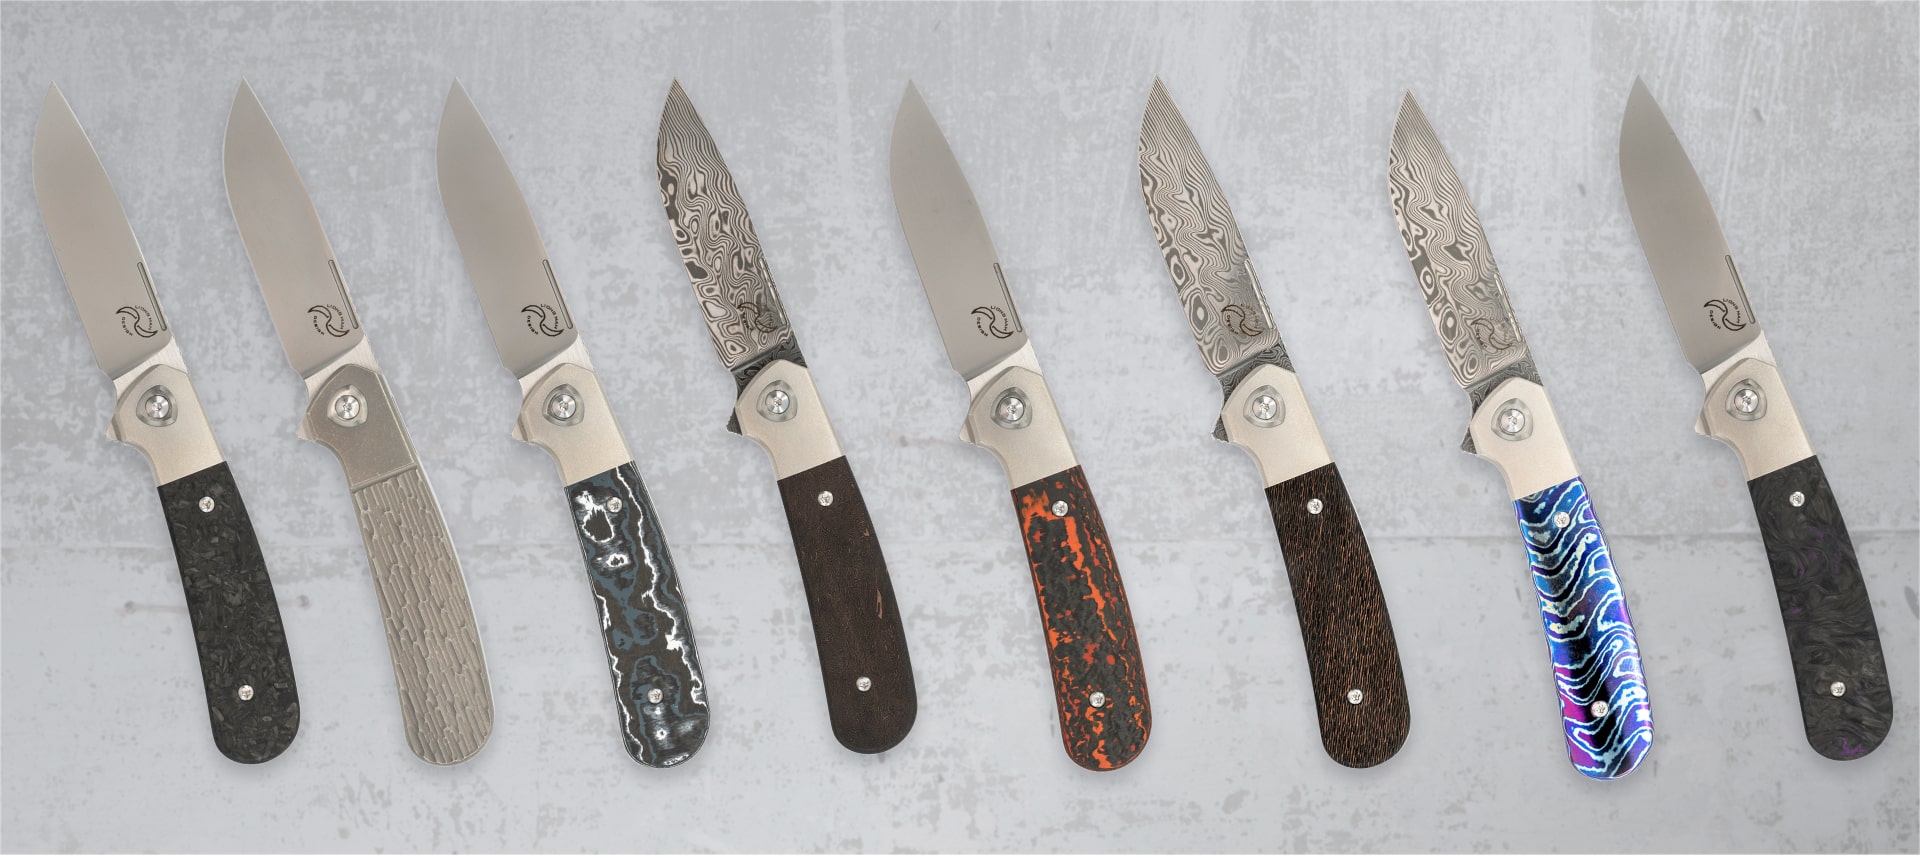 Ideal Gift 2022: Strong Lightweight Pocket Knife With Ergonomic Titanium Handle